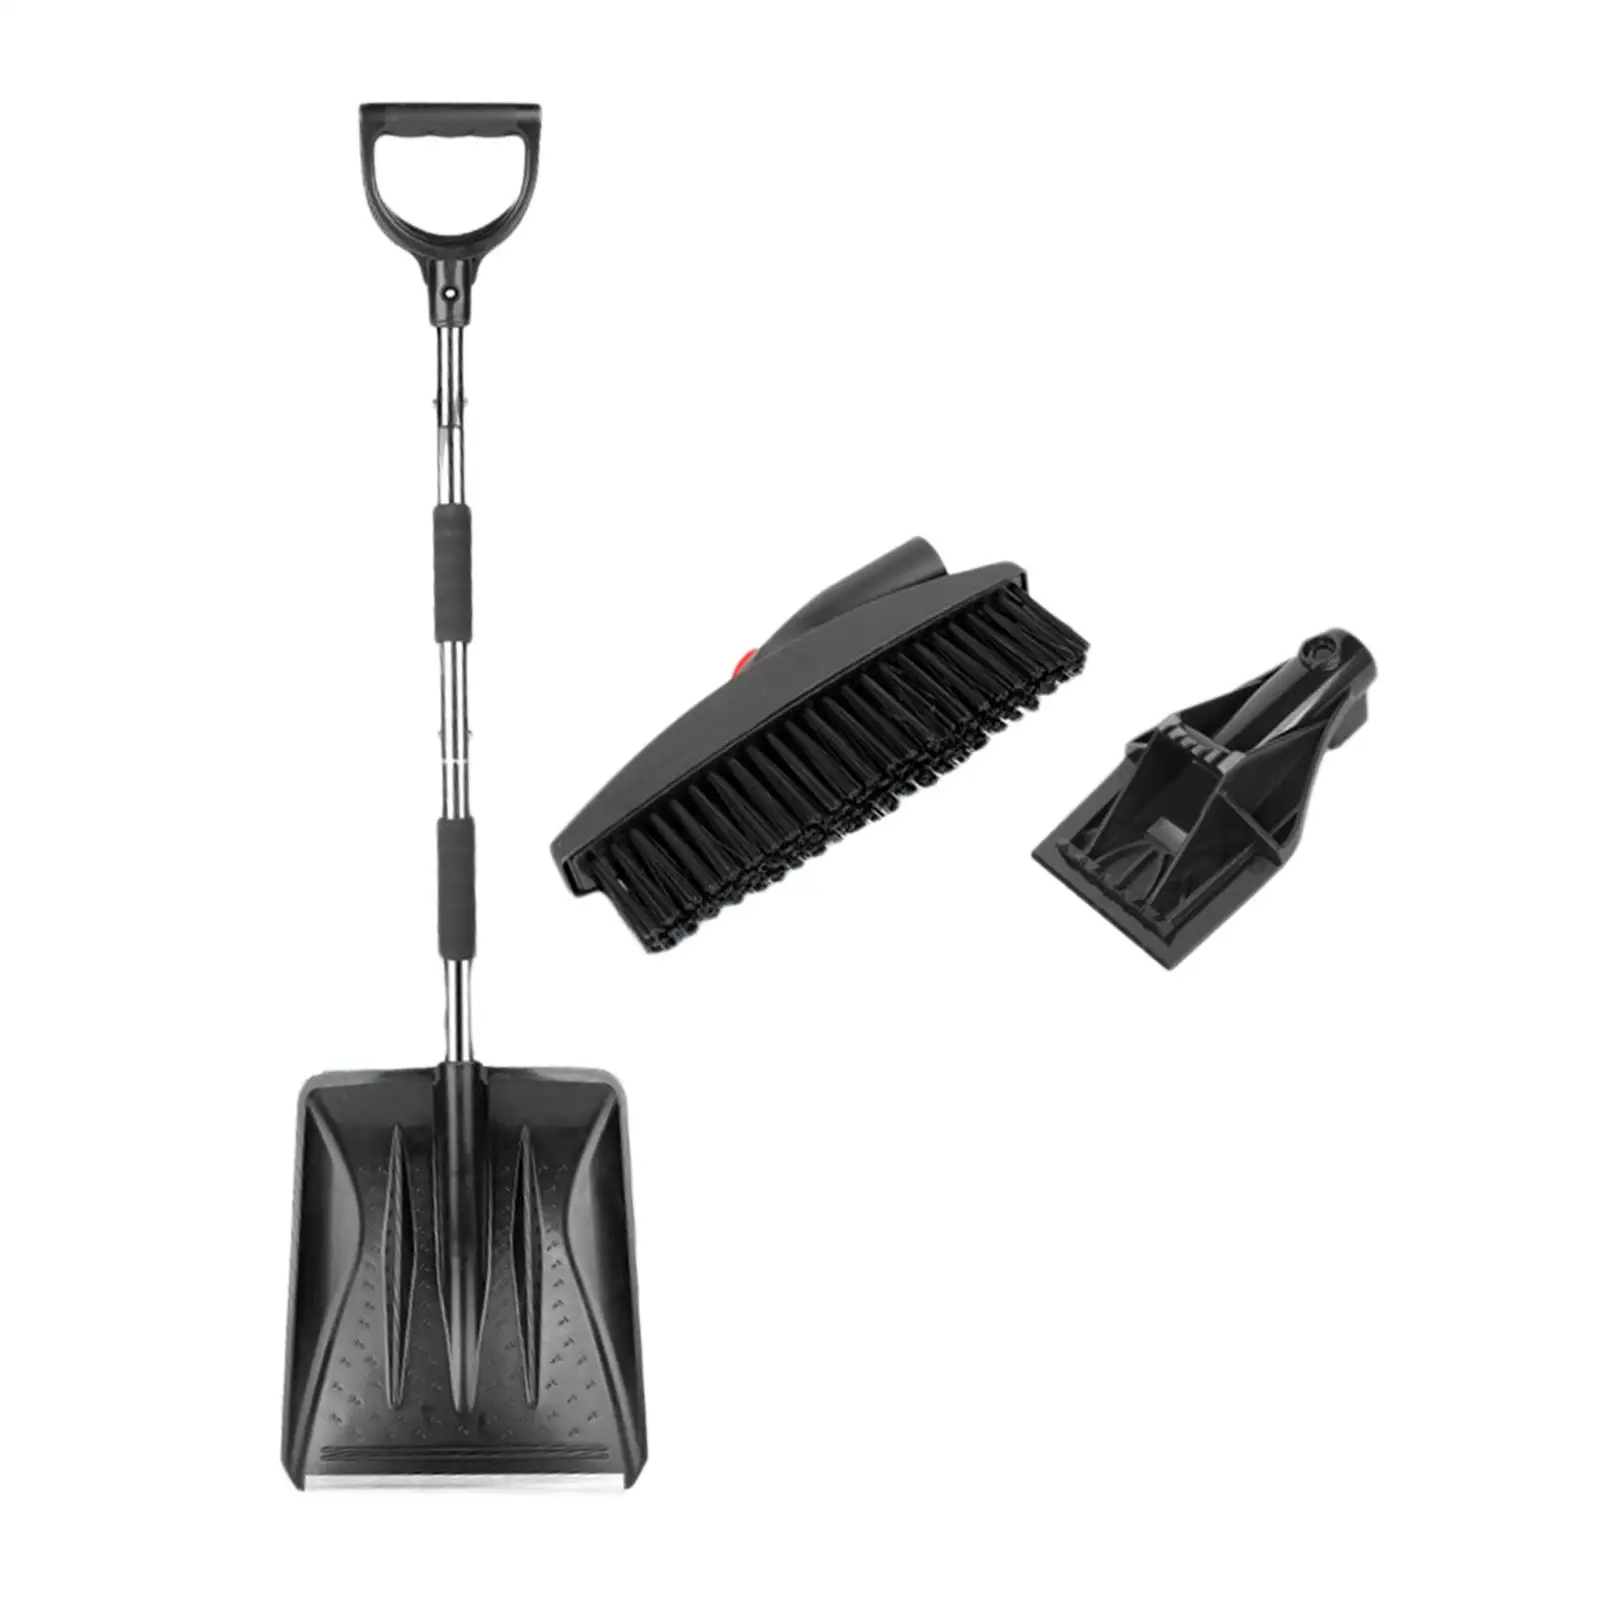 Snow Brush Scraper Snow Shovel for Car 3 in 1 Winter 360 Degree Rotatable Brush Head Practical Car Outdoor Snow Removal